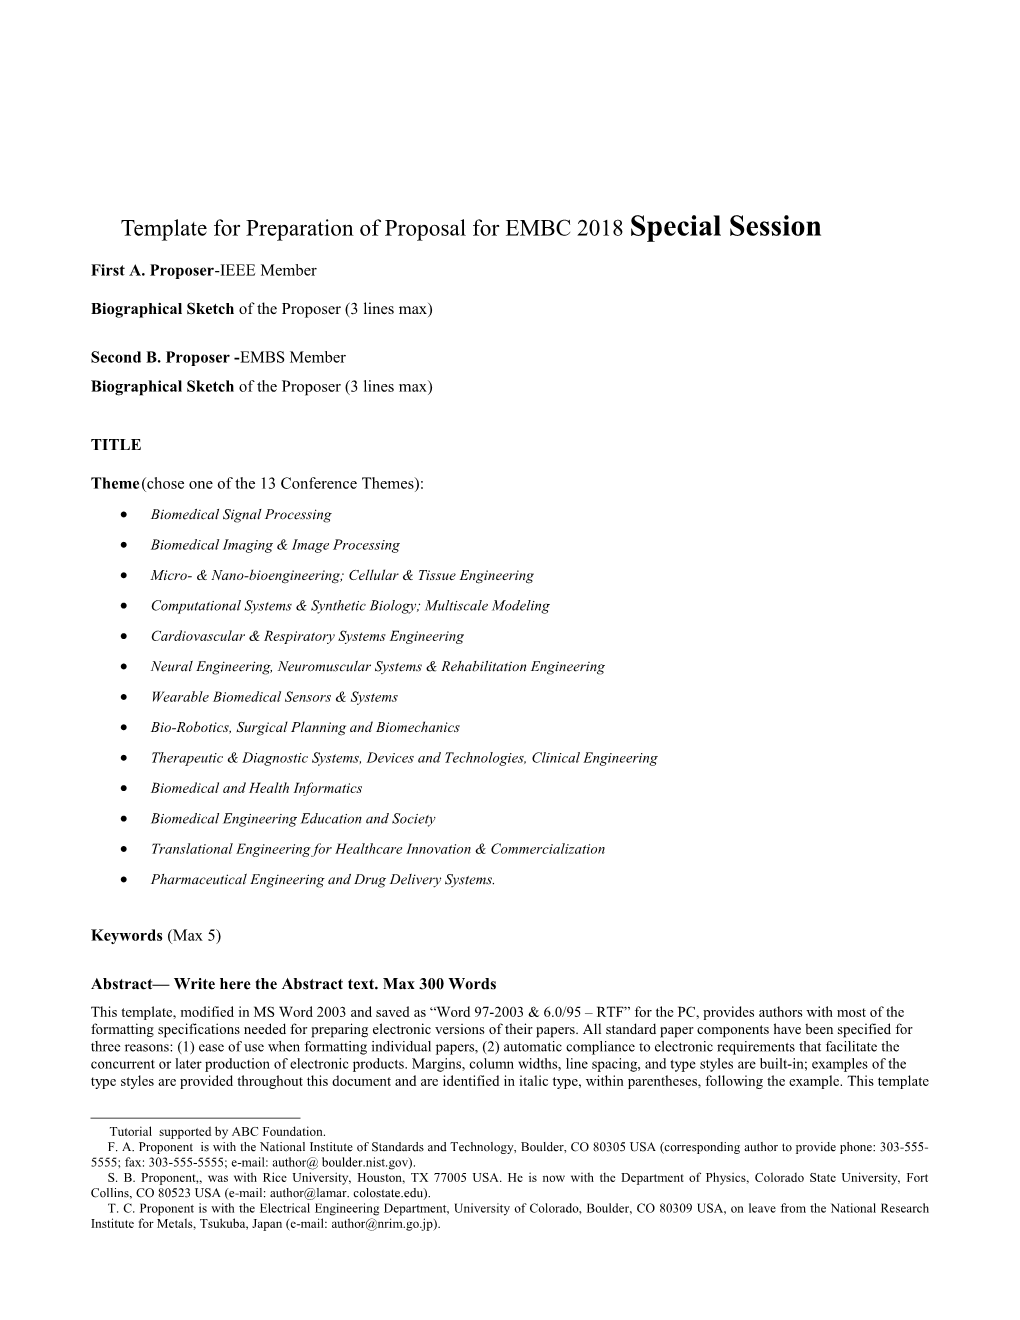 Template for Preparation of Proposal for EMBC 2018Special Session